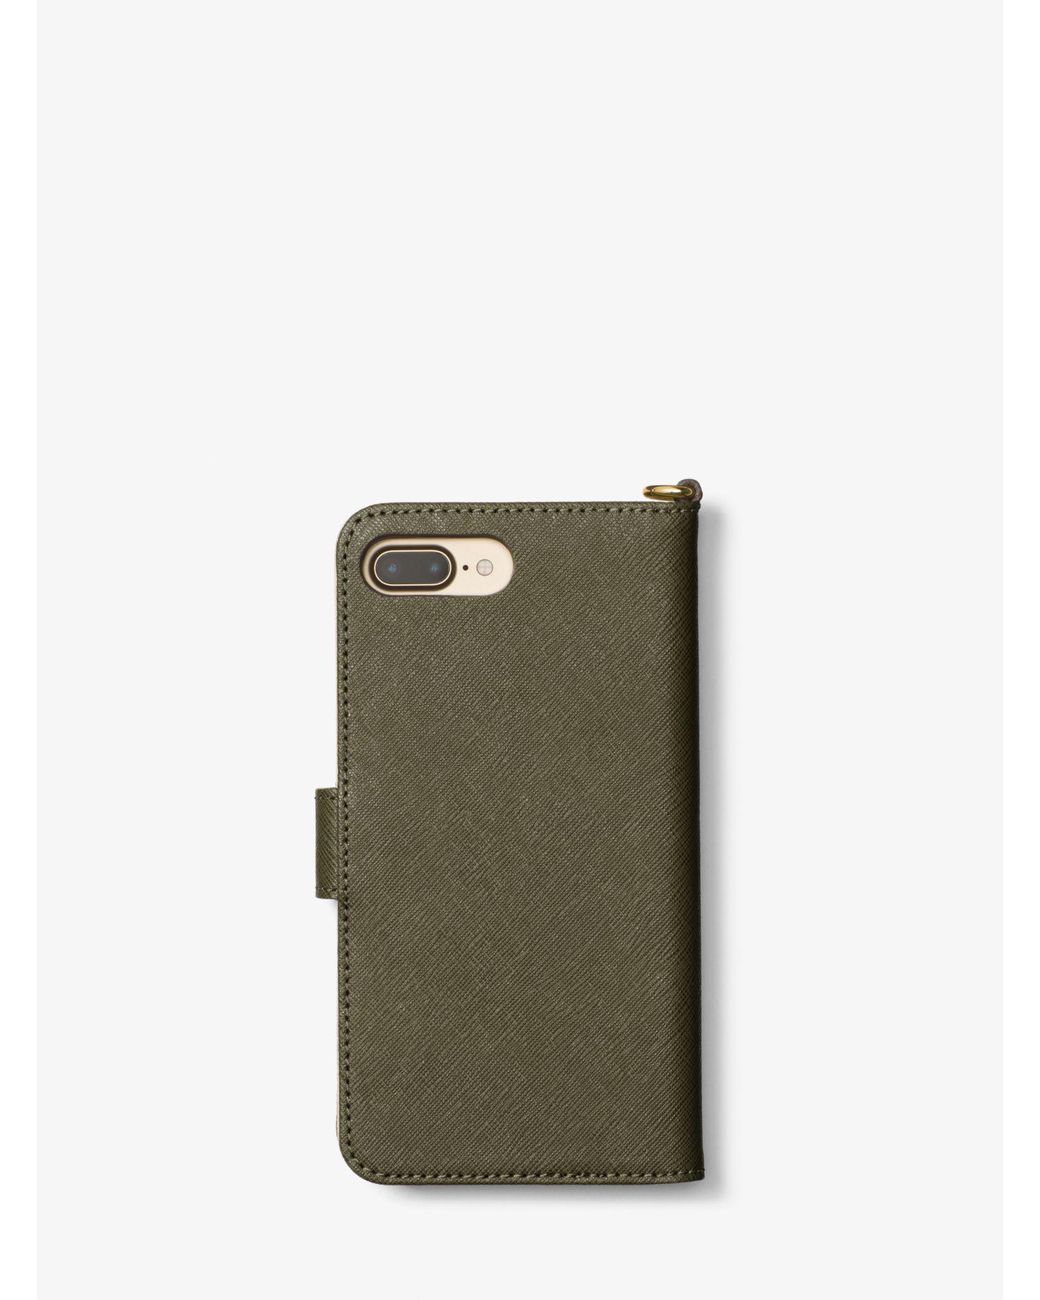 Michael Kors Saffiano Leather Folio Phone Case For Iphone 7 Plus in Olive  (Green) | Lyst